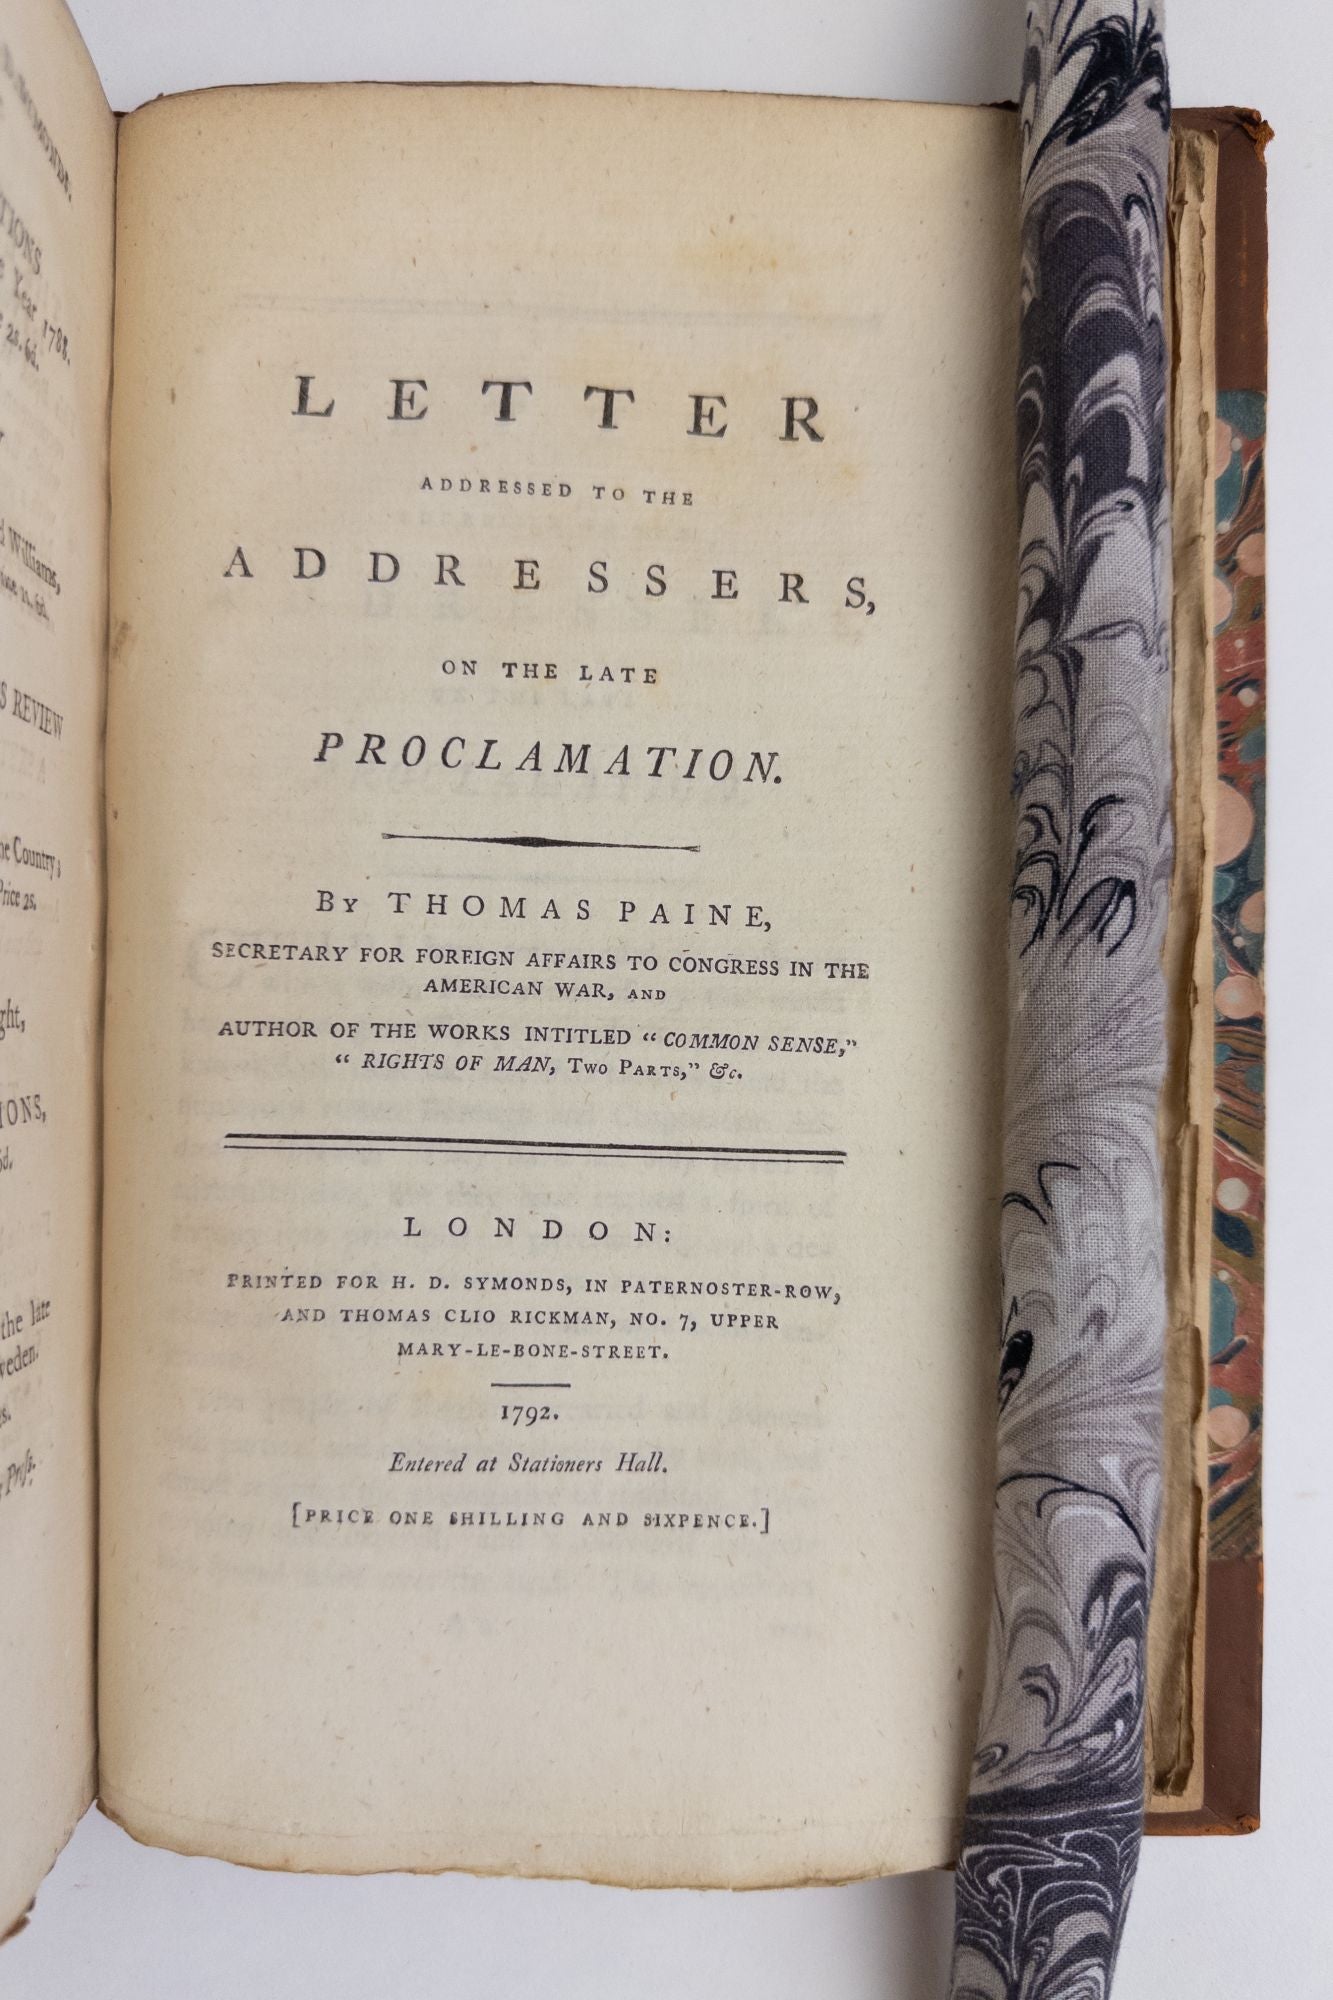 Product Image for RIGHTS OF MAN [Bound with] RIGHTS OF MAN PART THE SECOND [Bound with TWO LETTERS TO LORD ONSLOW [Bound with] LETTER ADDRESSED TO THE ADDRESSERS ON THE LATE PROCLAMATION